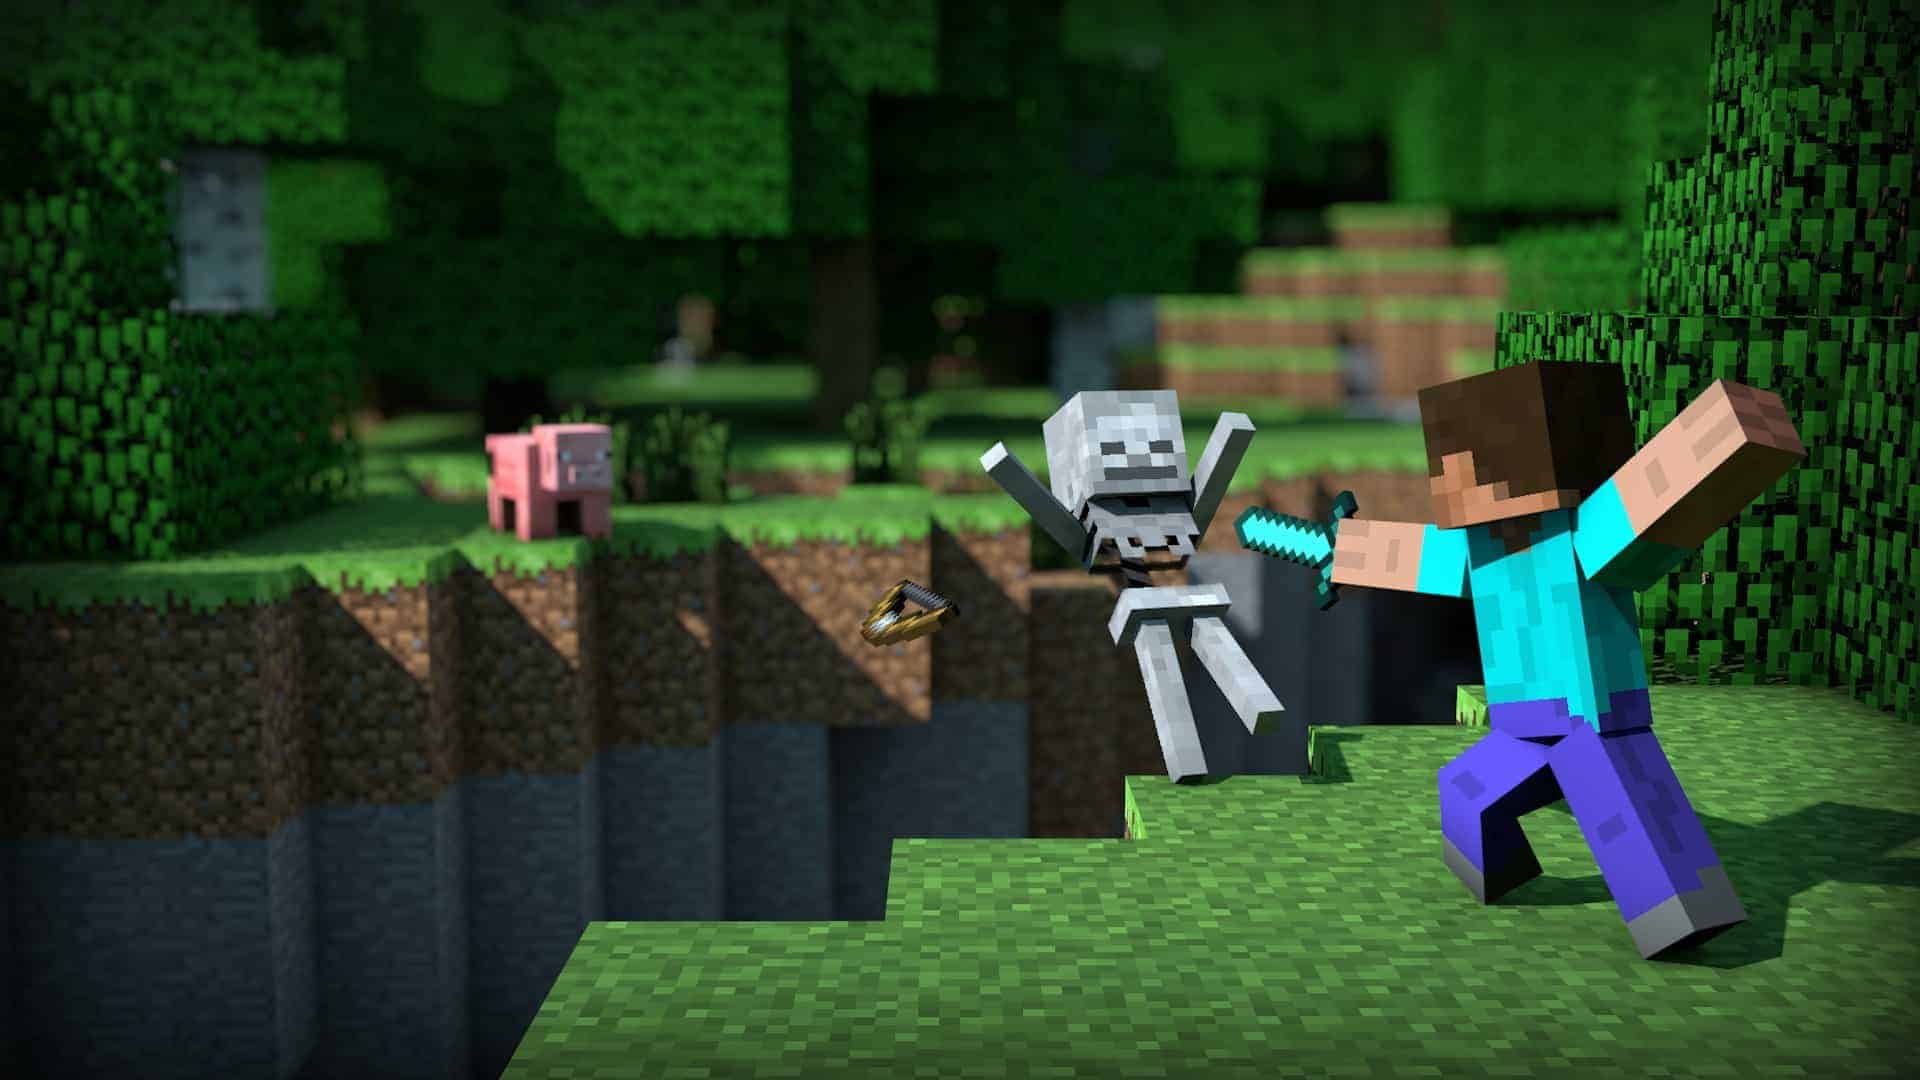 minecraft full game download for pc free